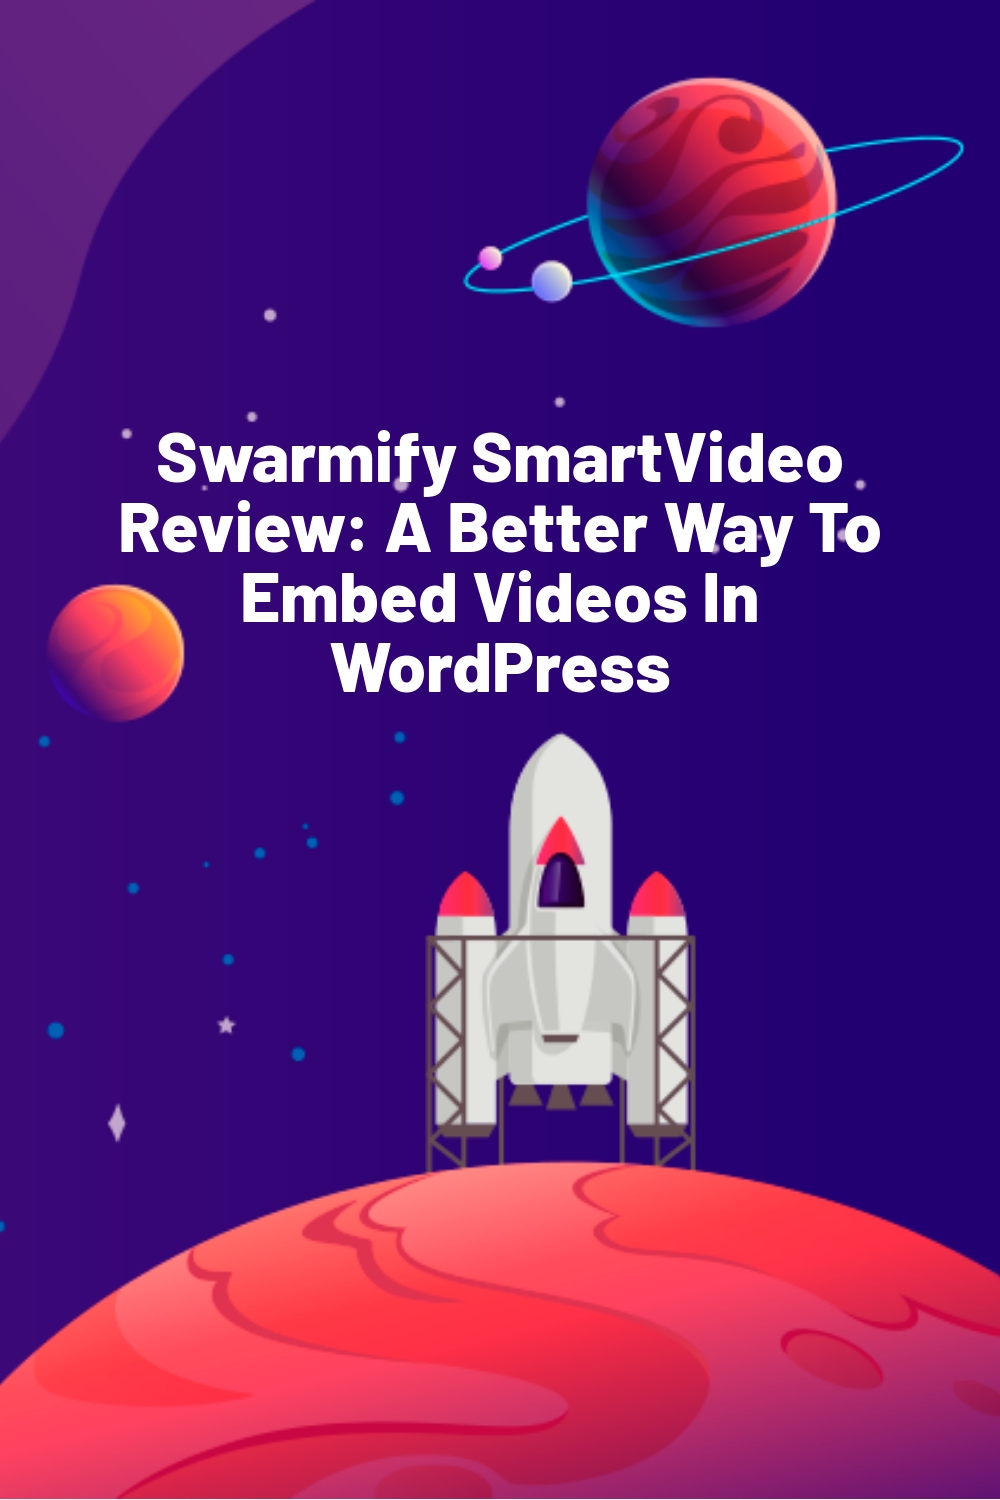 Swarmify SmartVideo Review: A Better Way To Embed Videos In WordPress